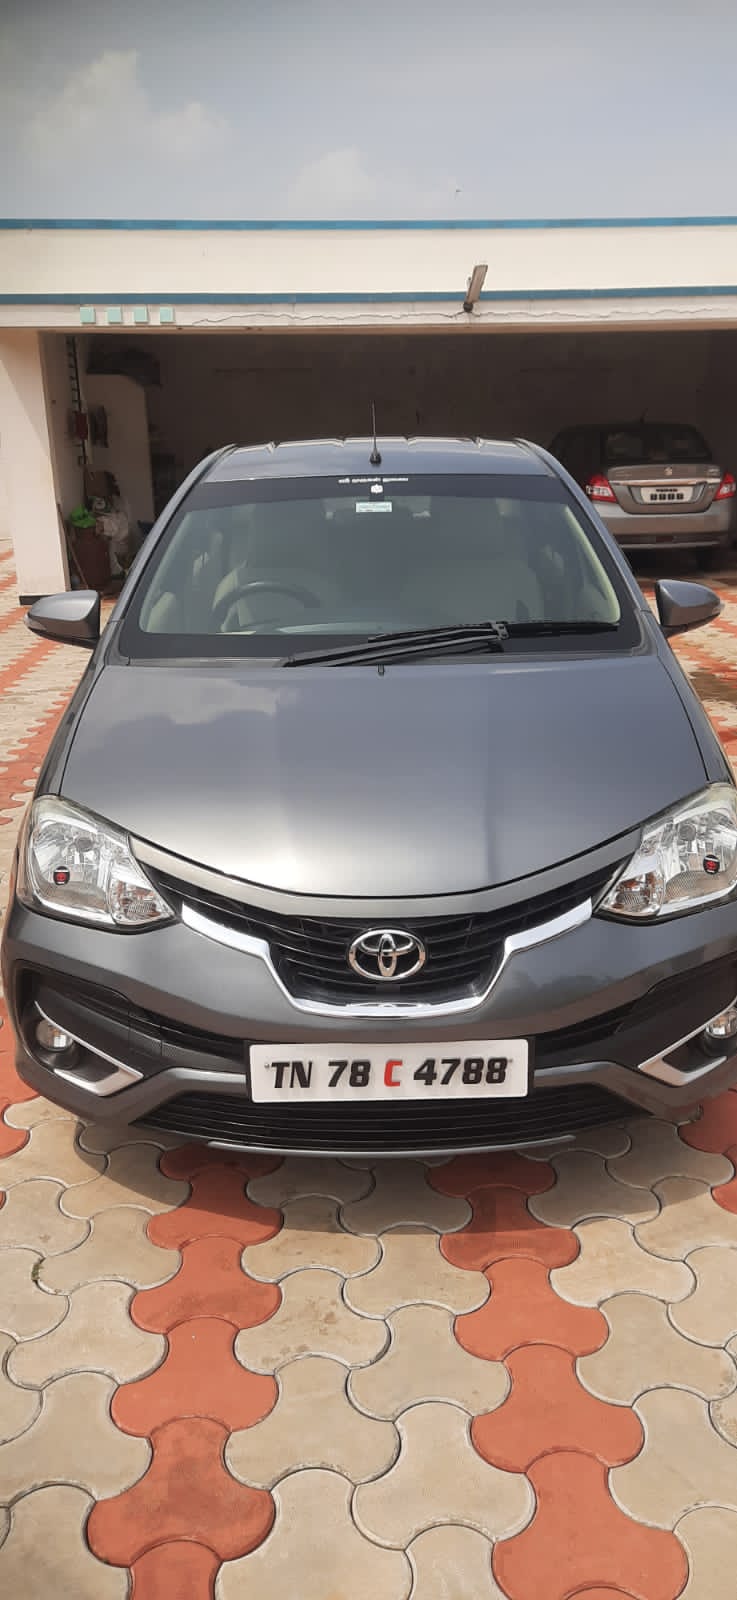 4718-for-sale-Toyota-Etios-Diesel-Second-Owner-2017-TN-registered-rs-690000